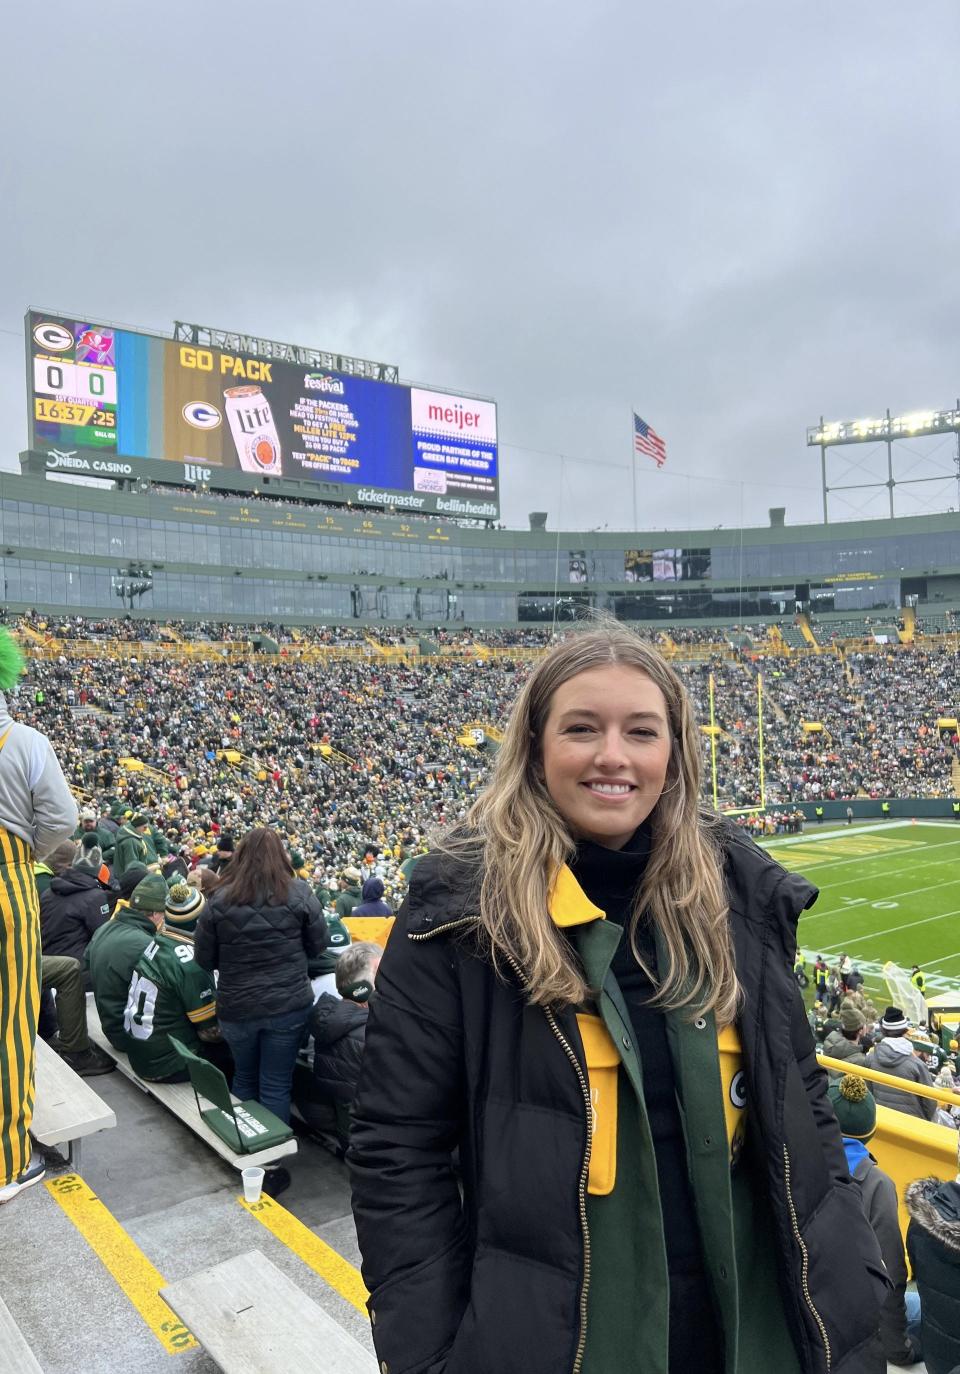 Grace Girard, a huge Wisconsin sports fan, is seen at Lambeau Field for a Green Bay Packers game. The Wisconsinite is a dating contestant on Fox's "Farmer Wants a Wife."